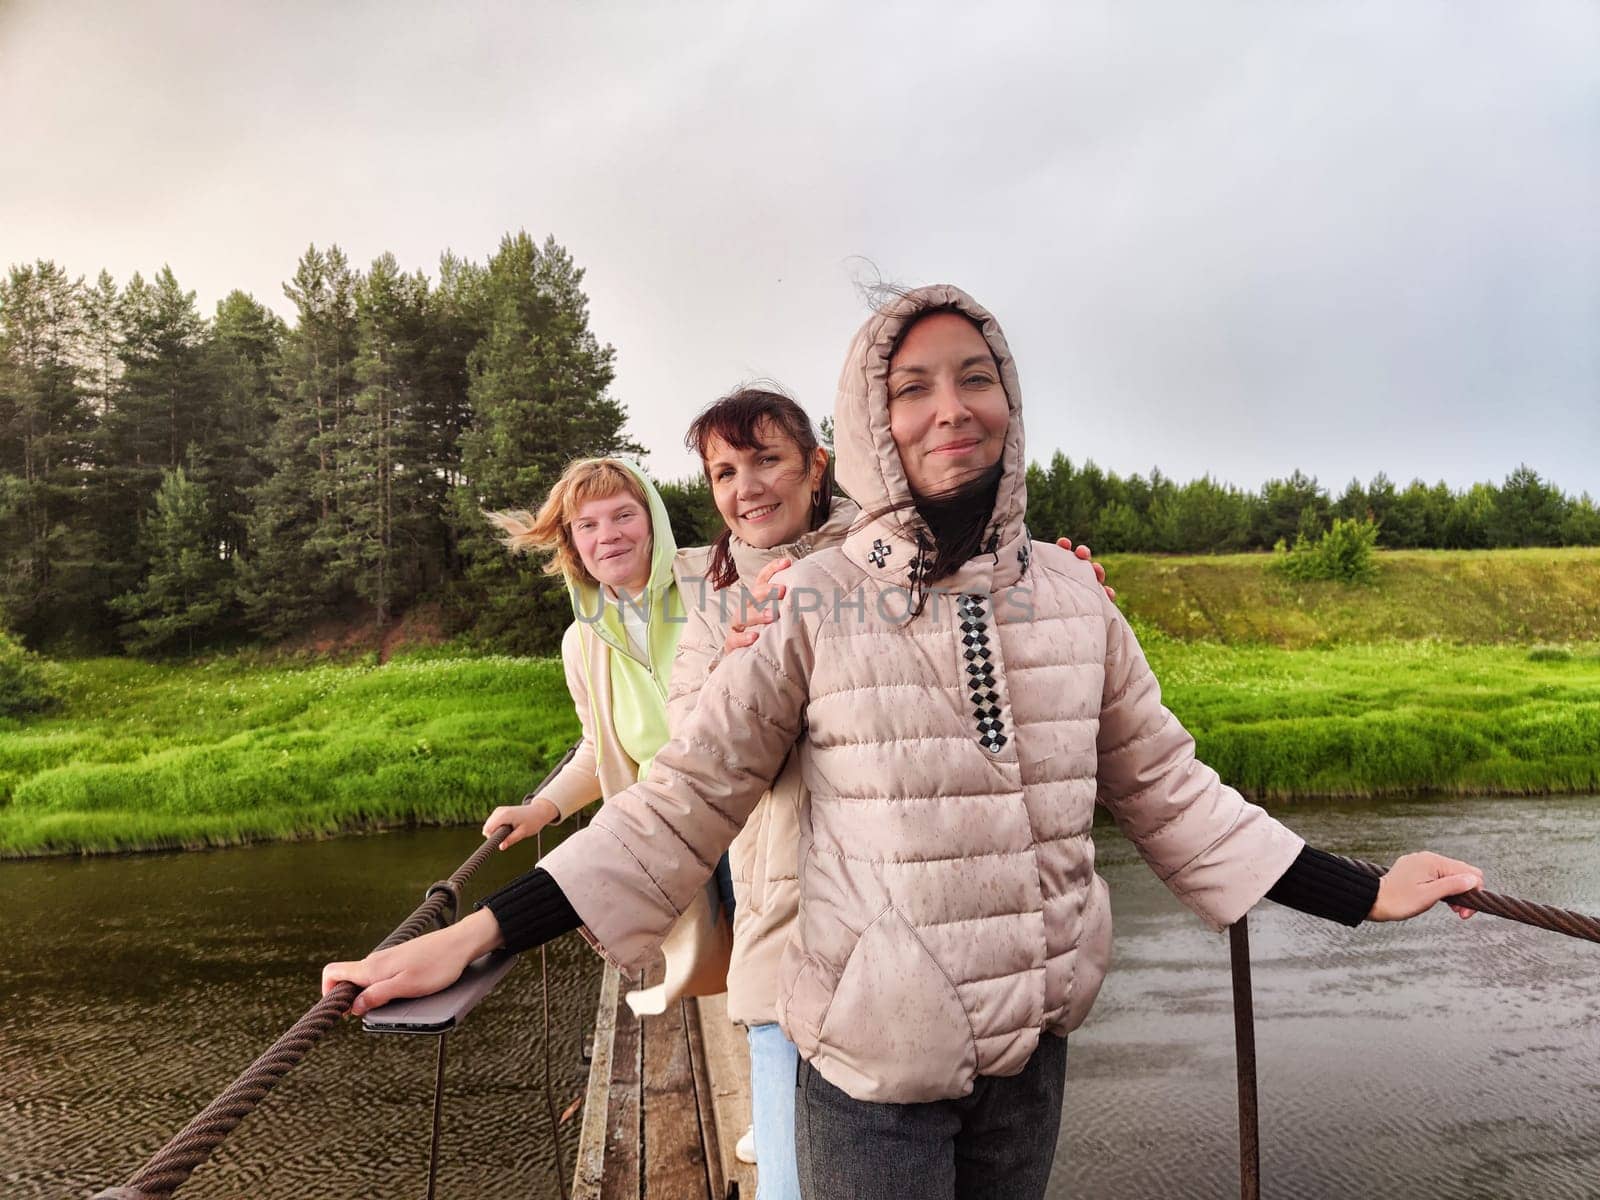 Three funny tourist girls on the old bridge in cloudy summer or spring day. Middle-aged women having fun outdoors